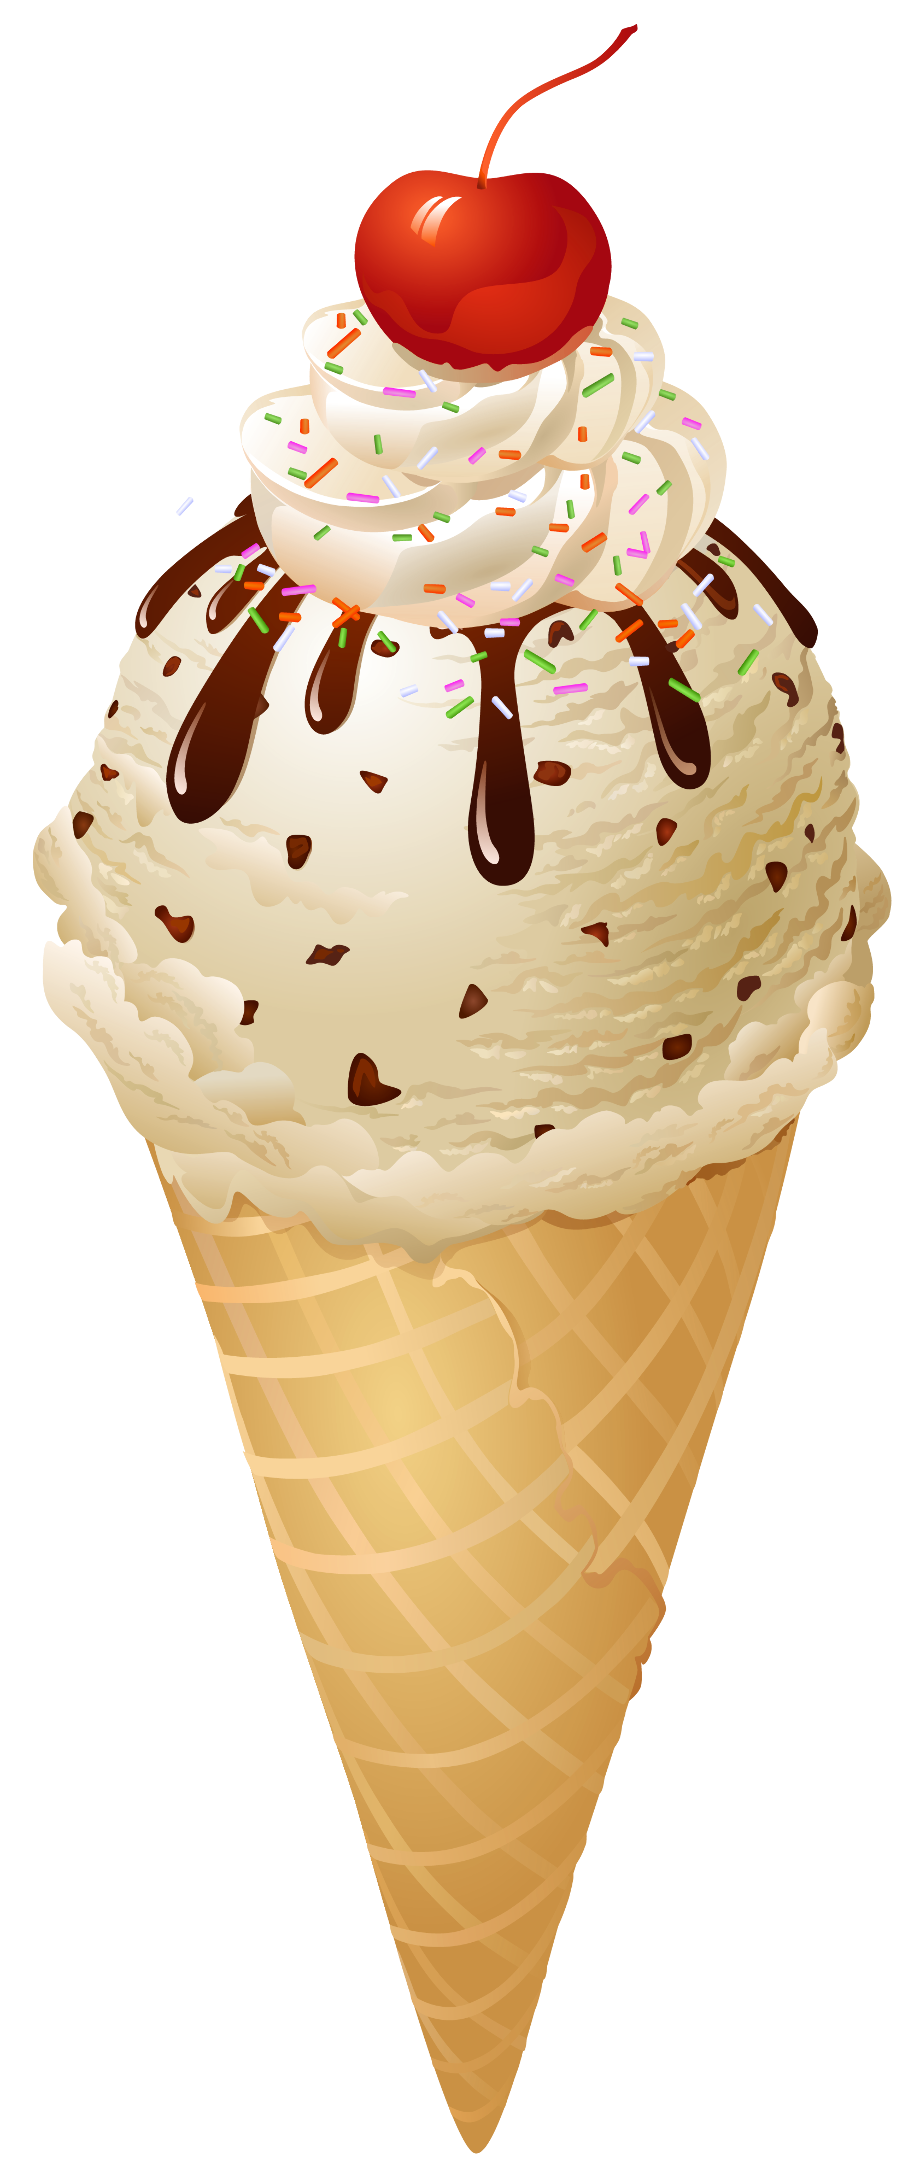 Download High Quality ice cream cone clipart transparent background